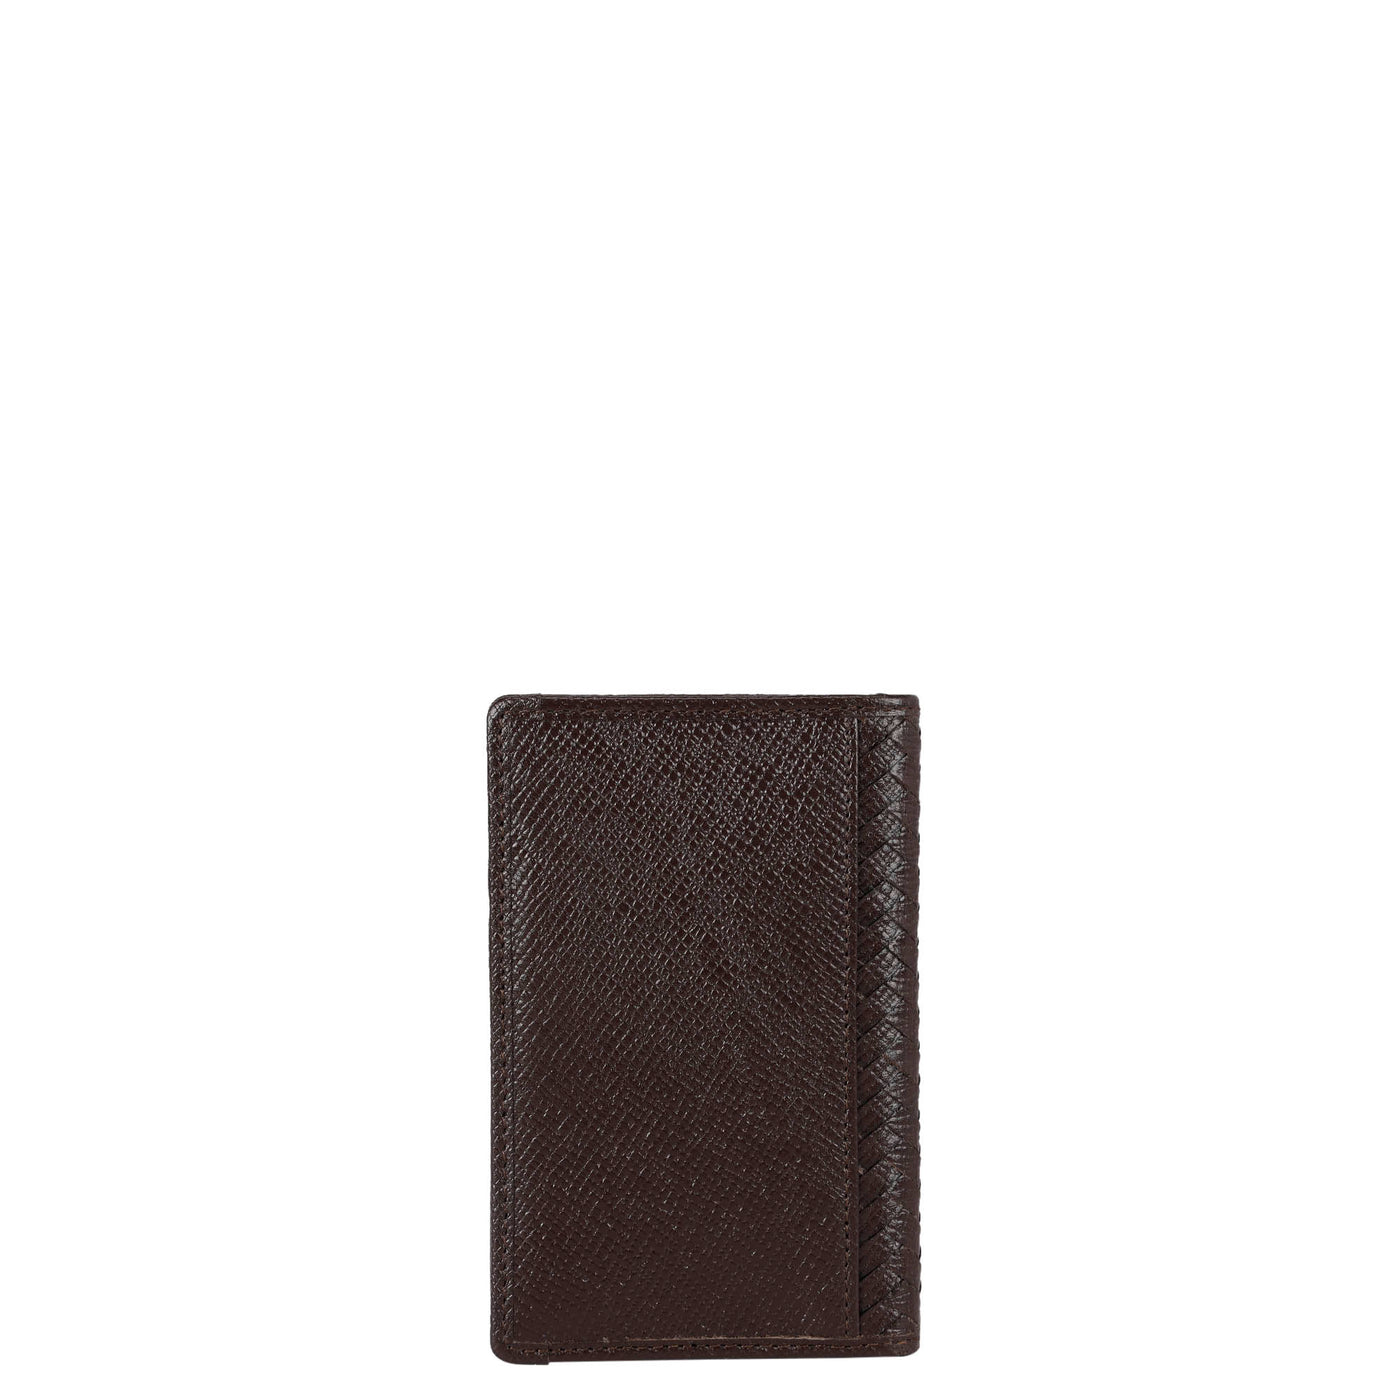 Mat Franzy Leather Card Case - Chocolate